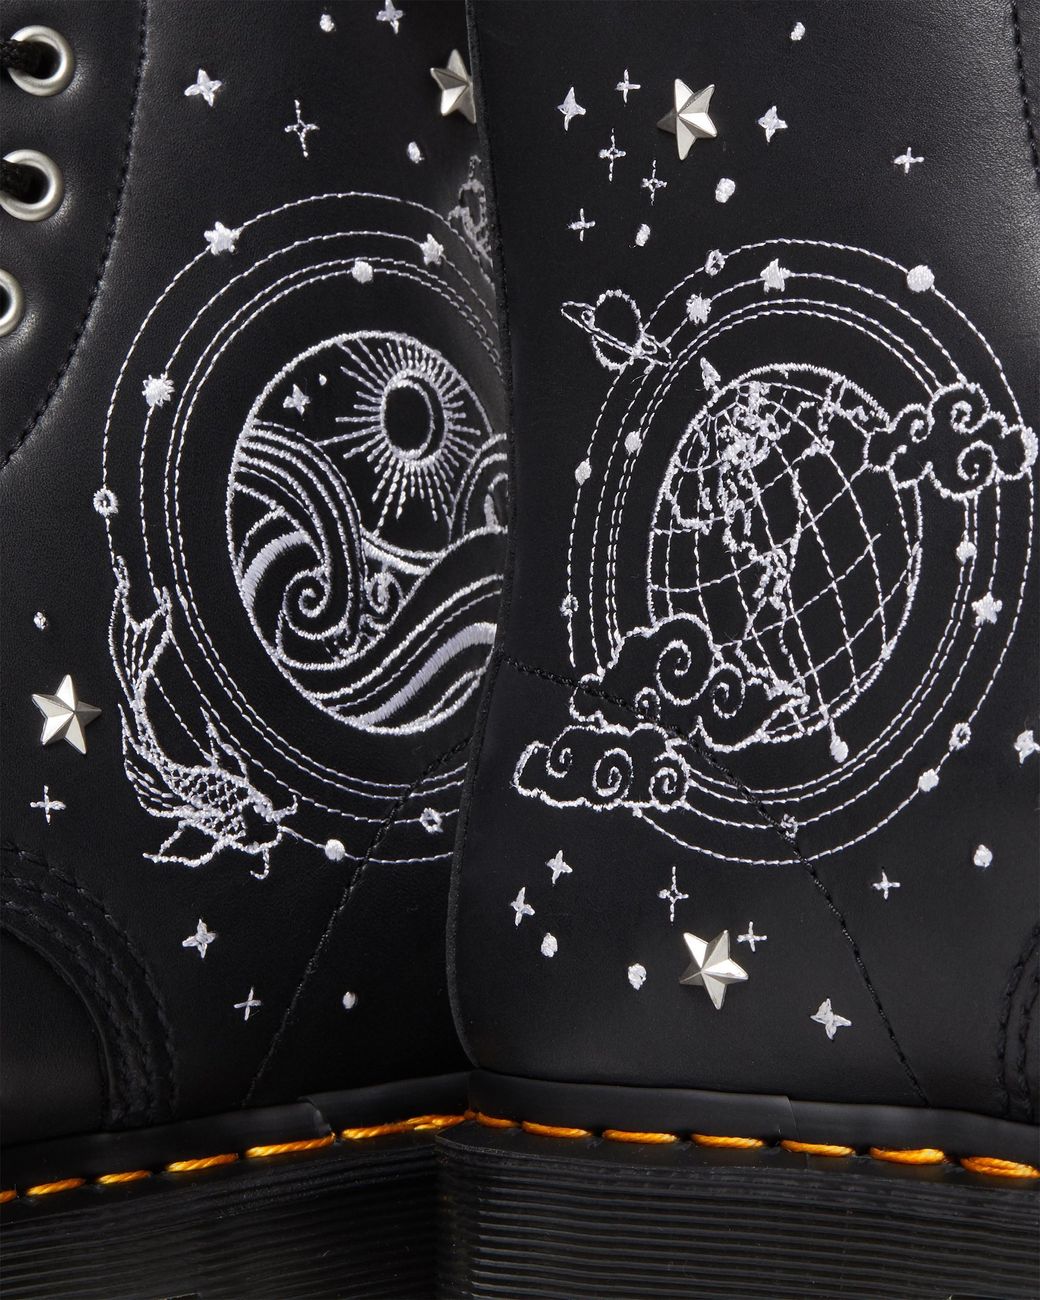 Dr. Martens 1460 Cosmic Embroidered Leather Lace Up Boots in Black | Lyst